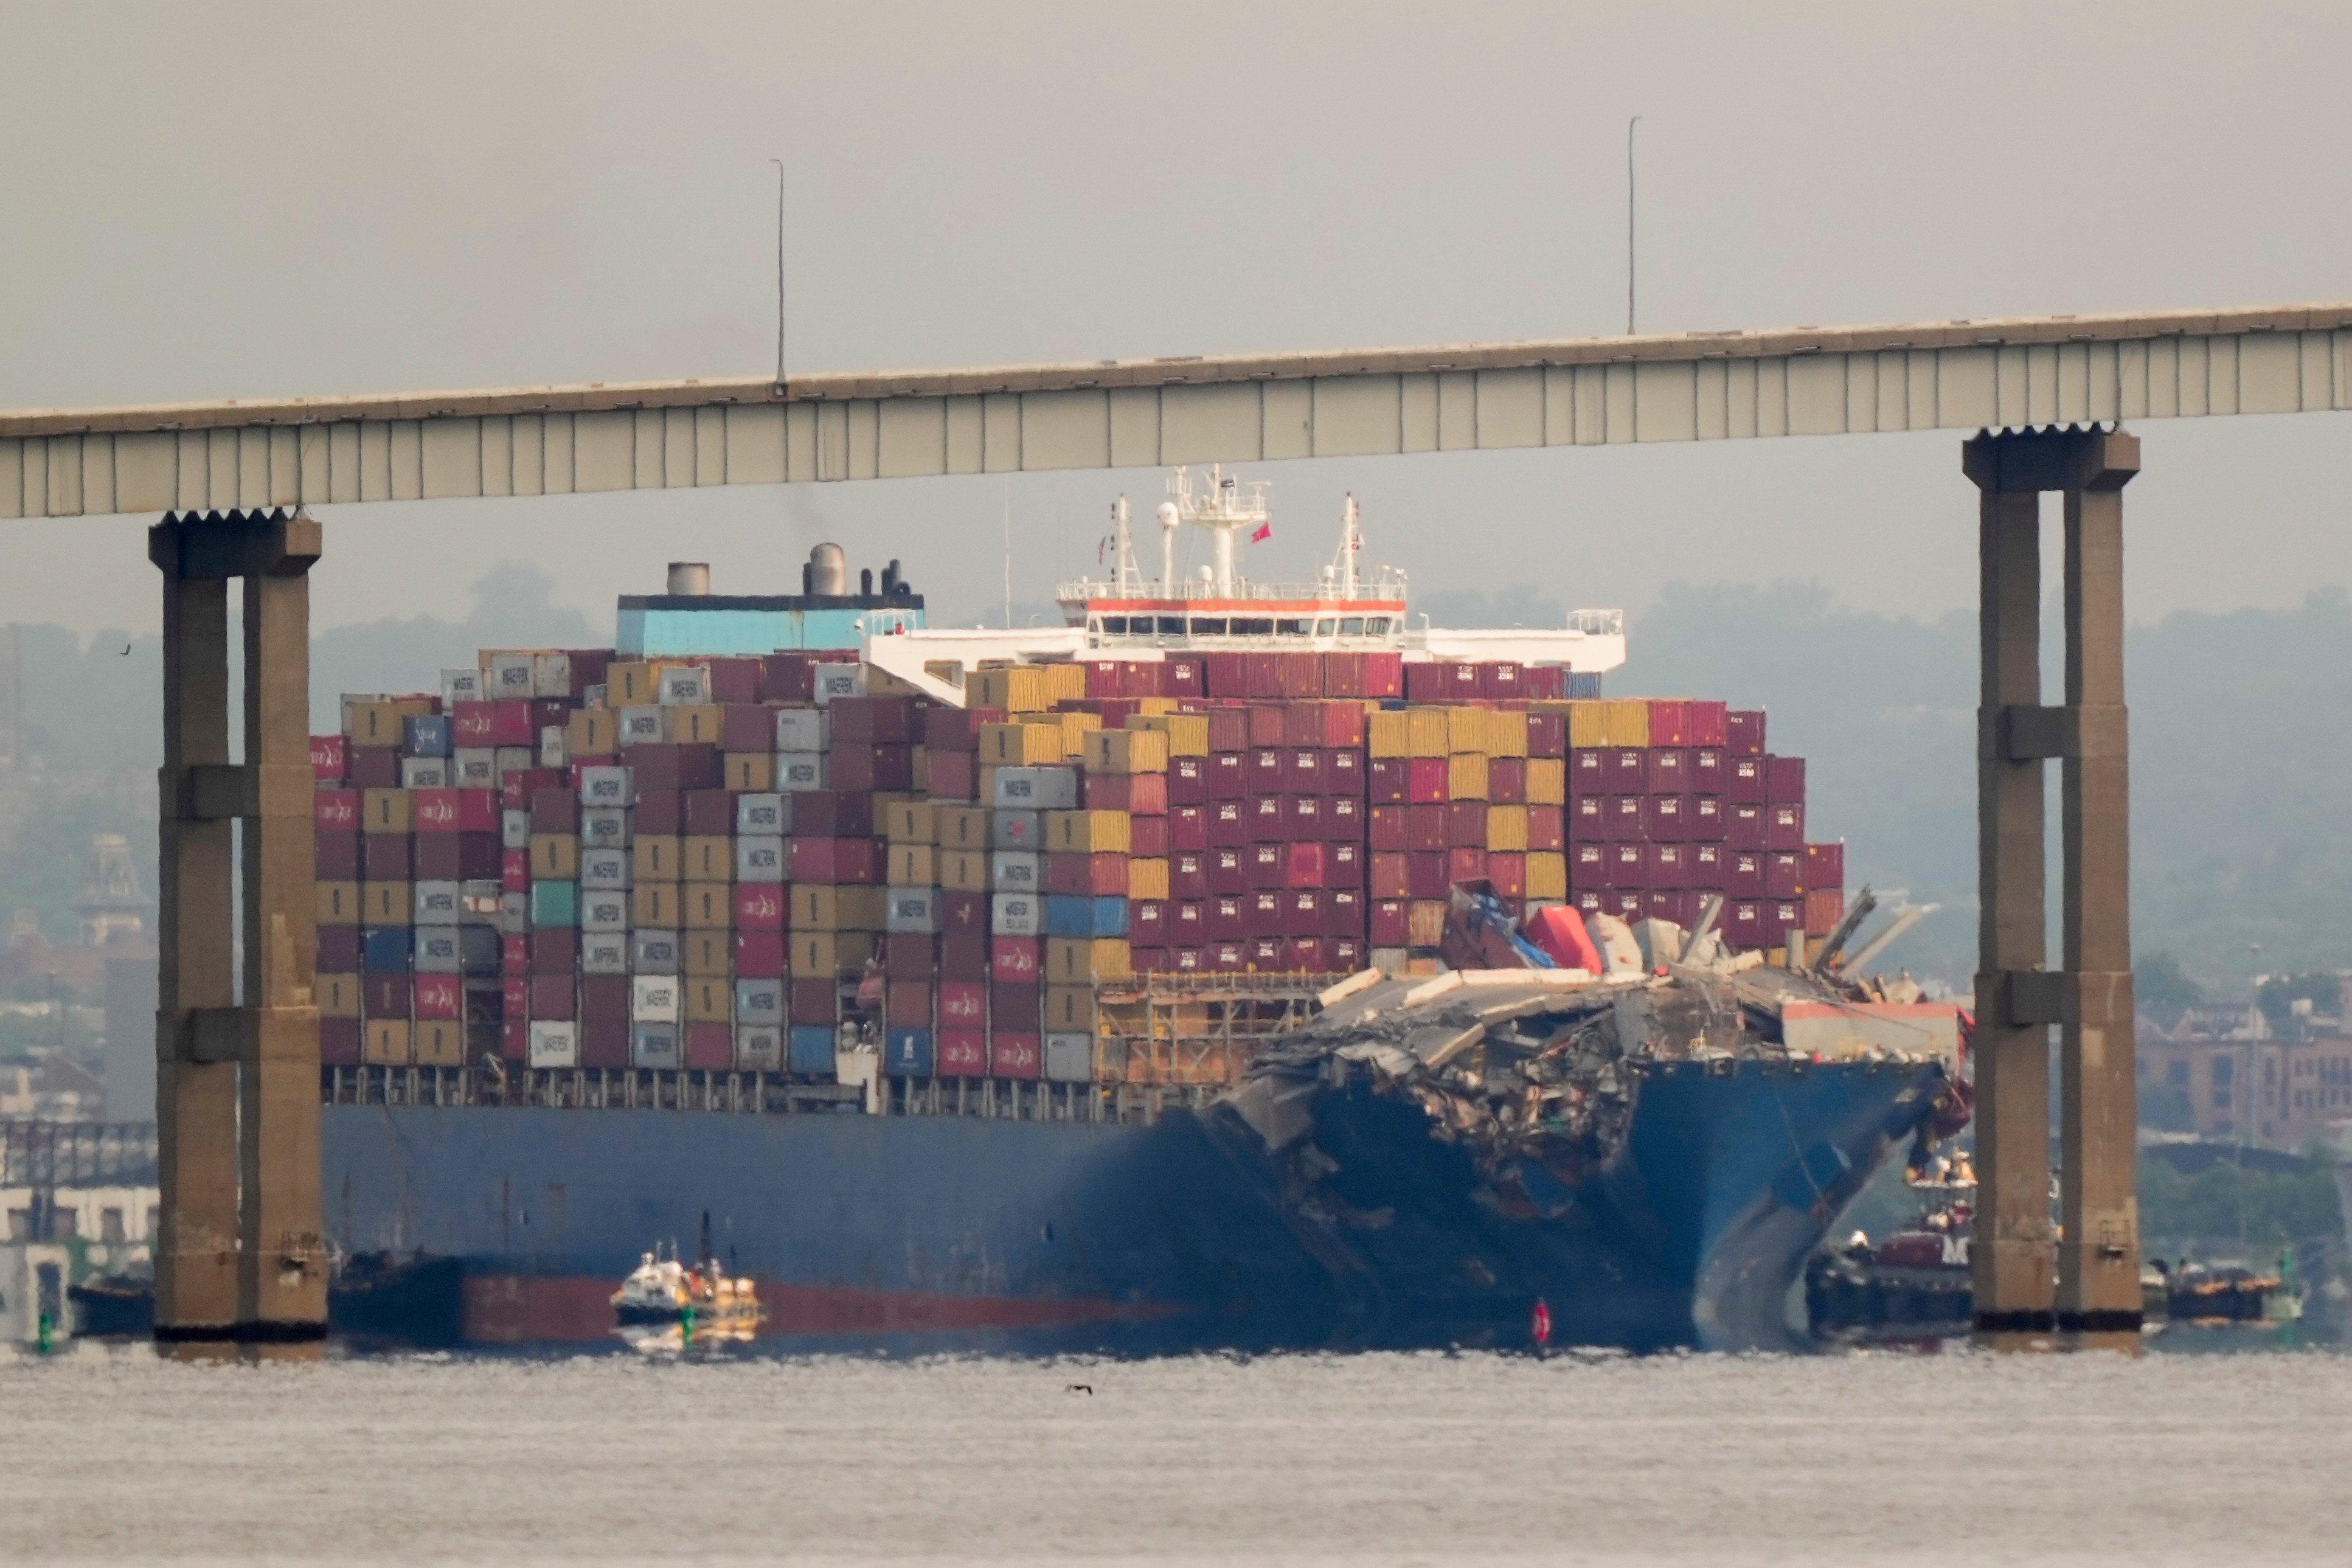 Tugboats escort the cargo ship Dali after it was refloated on May 20. On Monday, the ship left Baltimore 3 months after losing power and hitting the Francis Scott Key bridge’s supporting columns.